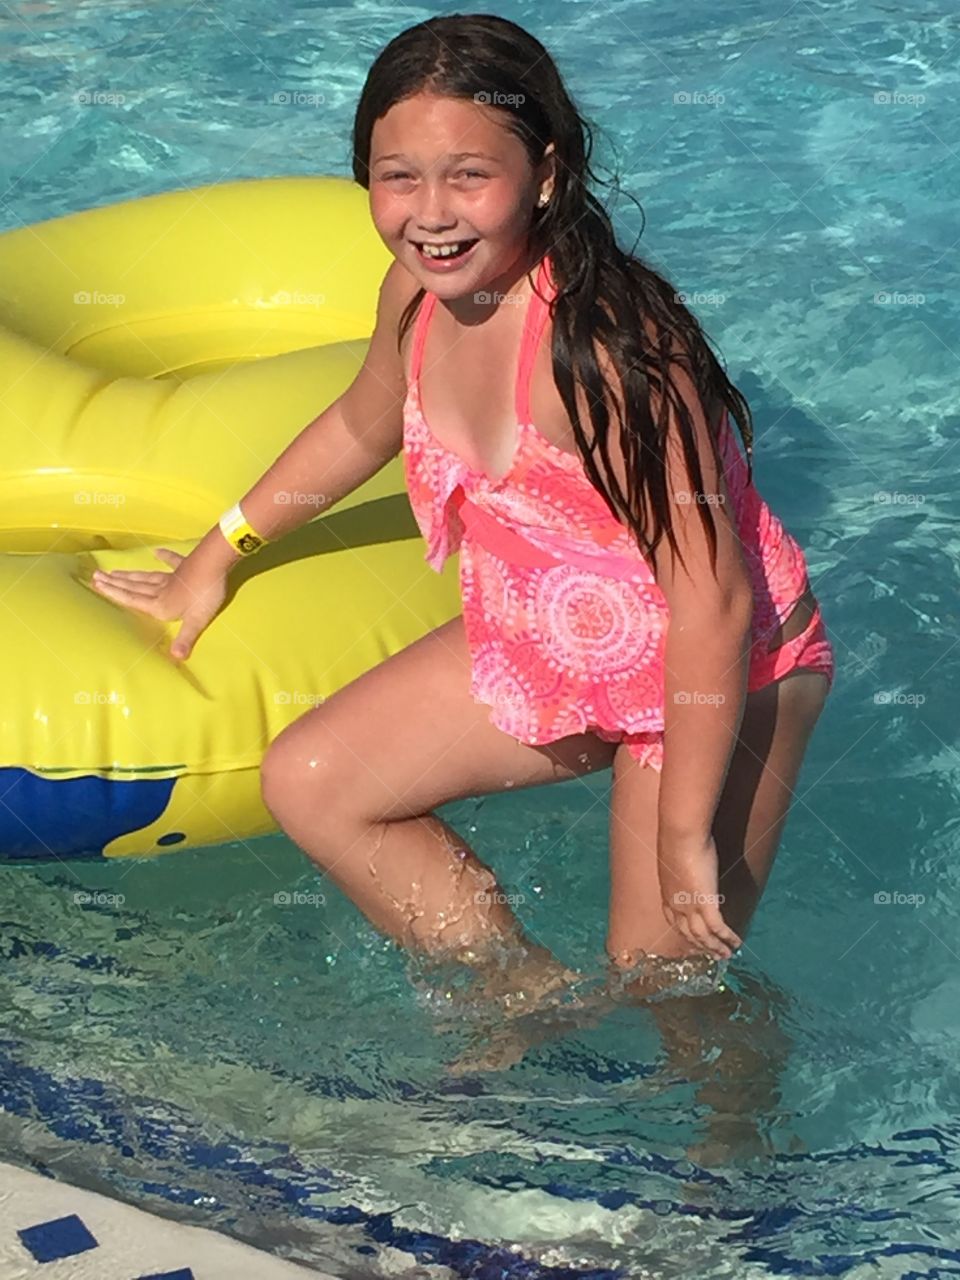 Smiling girl standing in pool